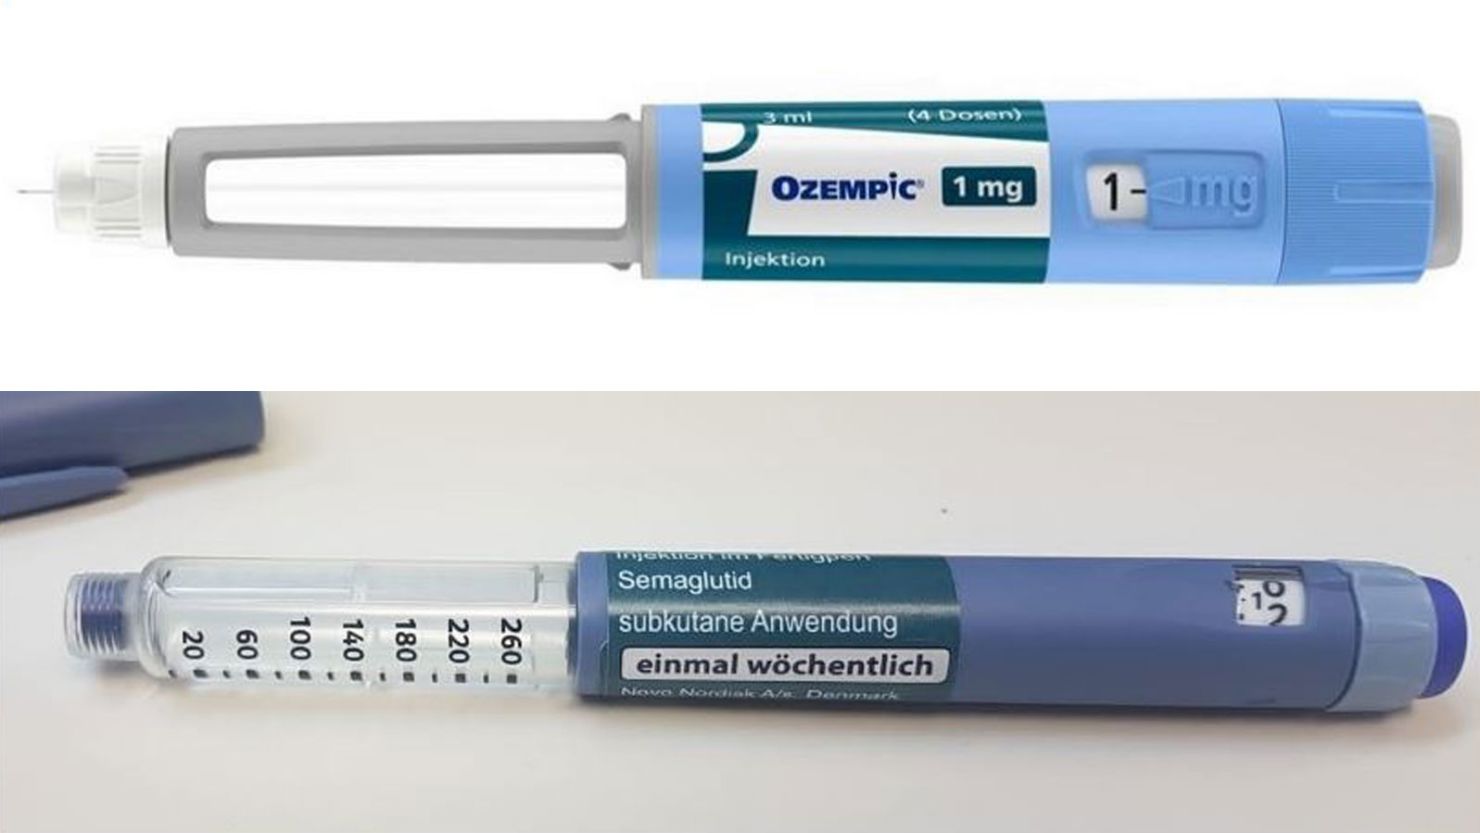 Fake versions of the popular diabetes medicine Ozempic have been found at wholesalers in the European Union and United Kingdom, the European Medicines Agency warned.